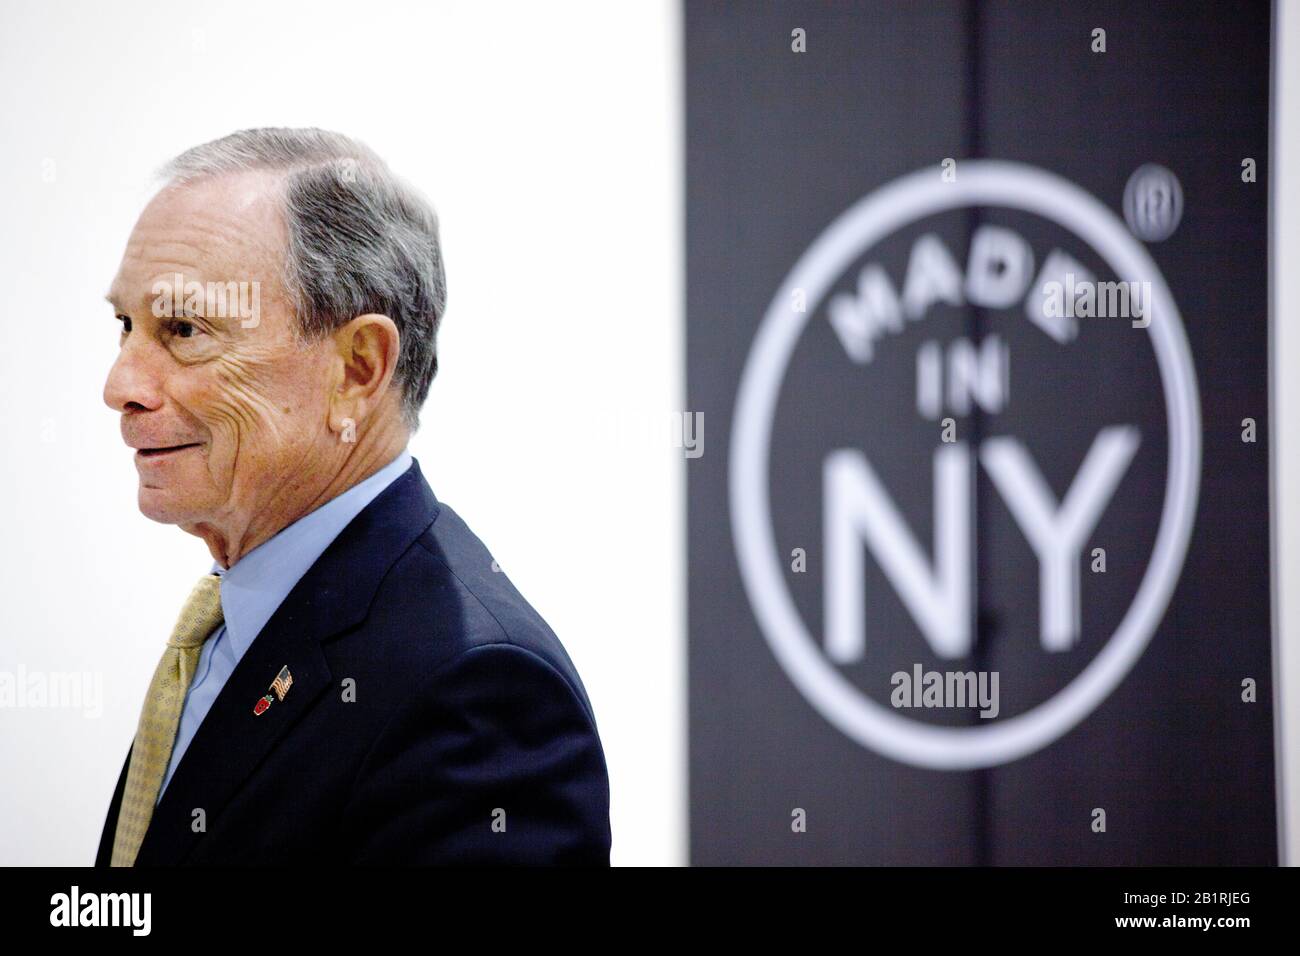 New York City mayor Michael J. Bloomberg at the opening of the new Steiner Studios in Brooklyn Navy Yard. New York has always had a thriving movie industry, but in tough competition with cities on the west coast and in Canada. Behind him is a new trademarked logo with the words 'Made in NY'. Stock Photo